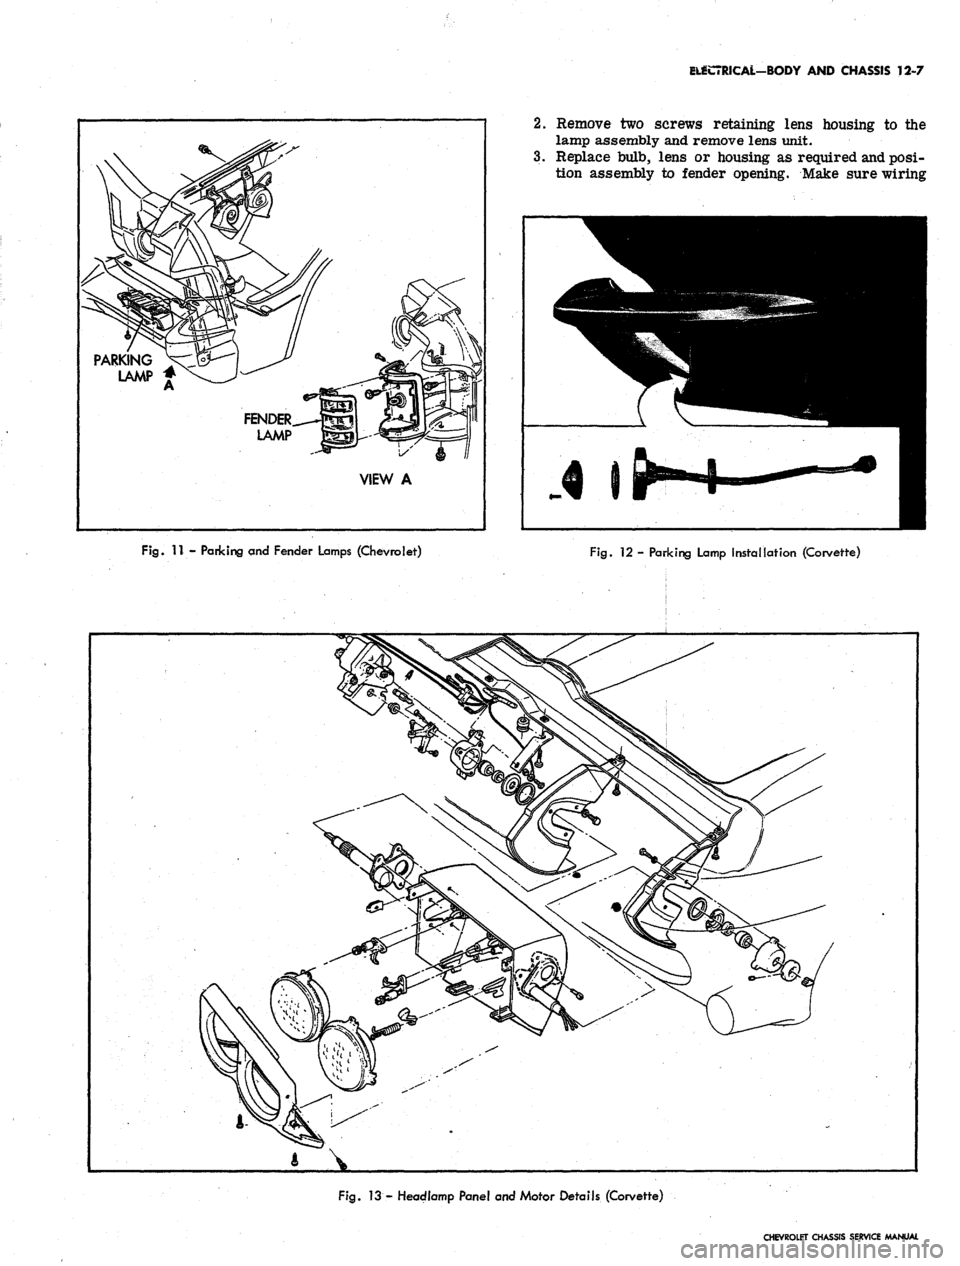 CHEVROLET CAMARO 1967 1.G Chassis User Guide 
EL«C7RICAL-BODY AND CHASSIS 12-7

PARKING
 A

LAMP* 
2.
 Remove two screws retaining lens housing to the

lamp assembly and remove lens unit.

3.
 Replace bulb, lens or housing as required and posi-